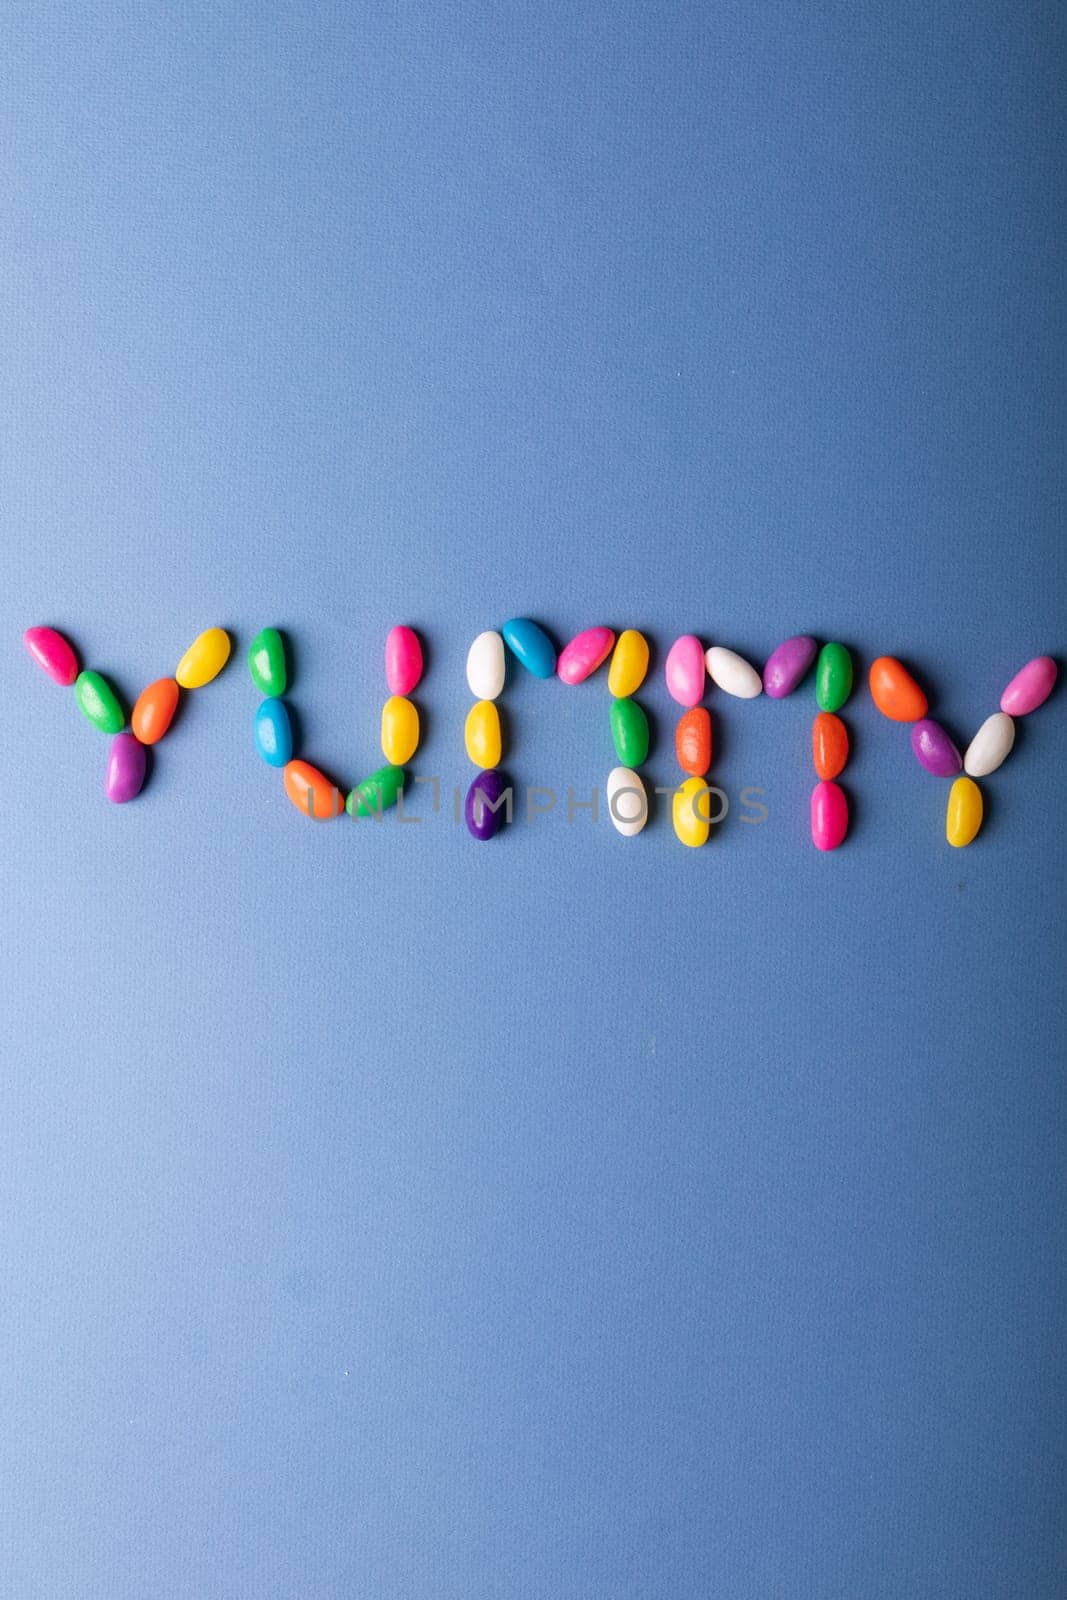 Directly above view of yummy word arranged from colorful candies on blue background over copy space by Wavebreakmedia